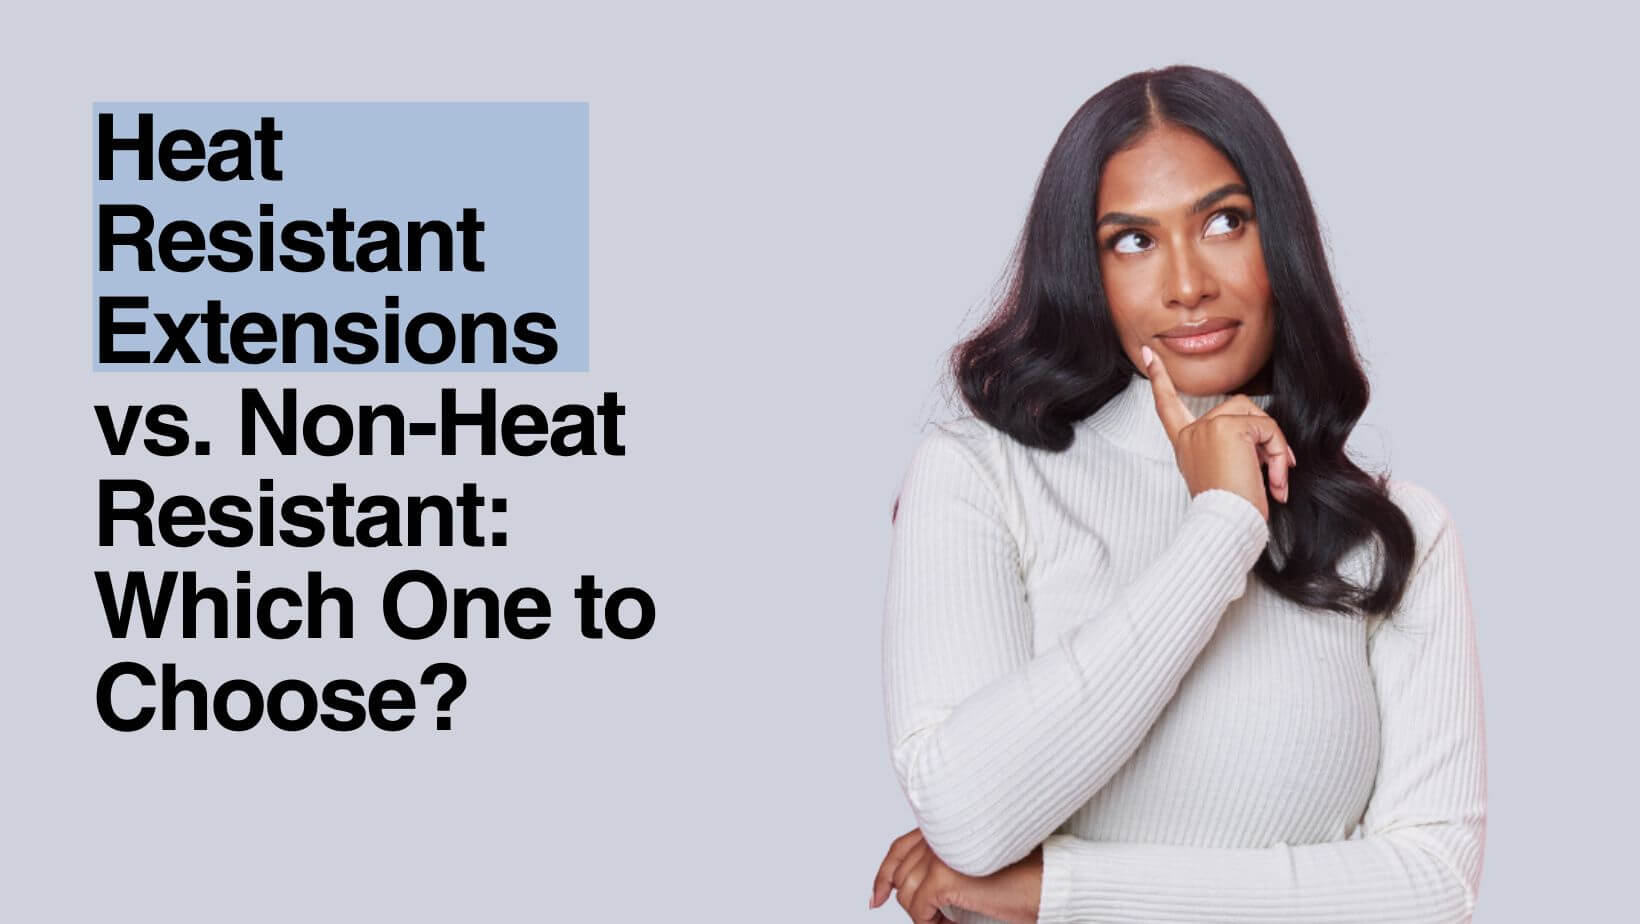 Heat Resistant Hair Extensions vs. Non-Heat Resistant: Which One to Choose?